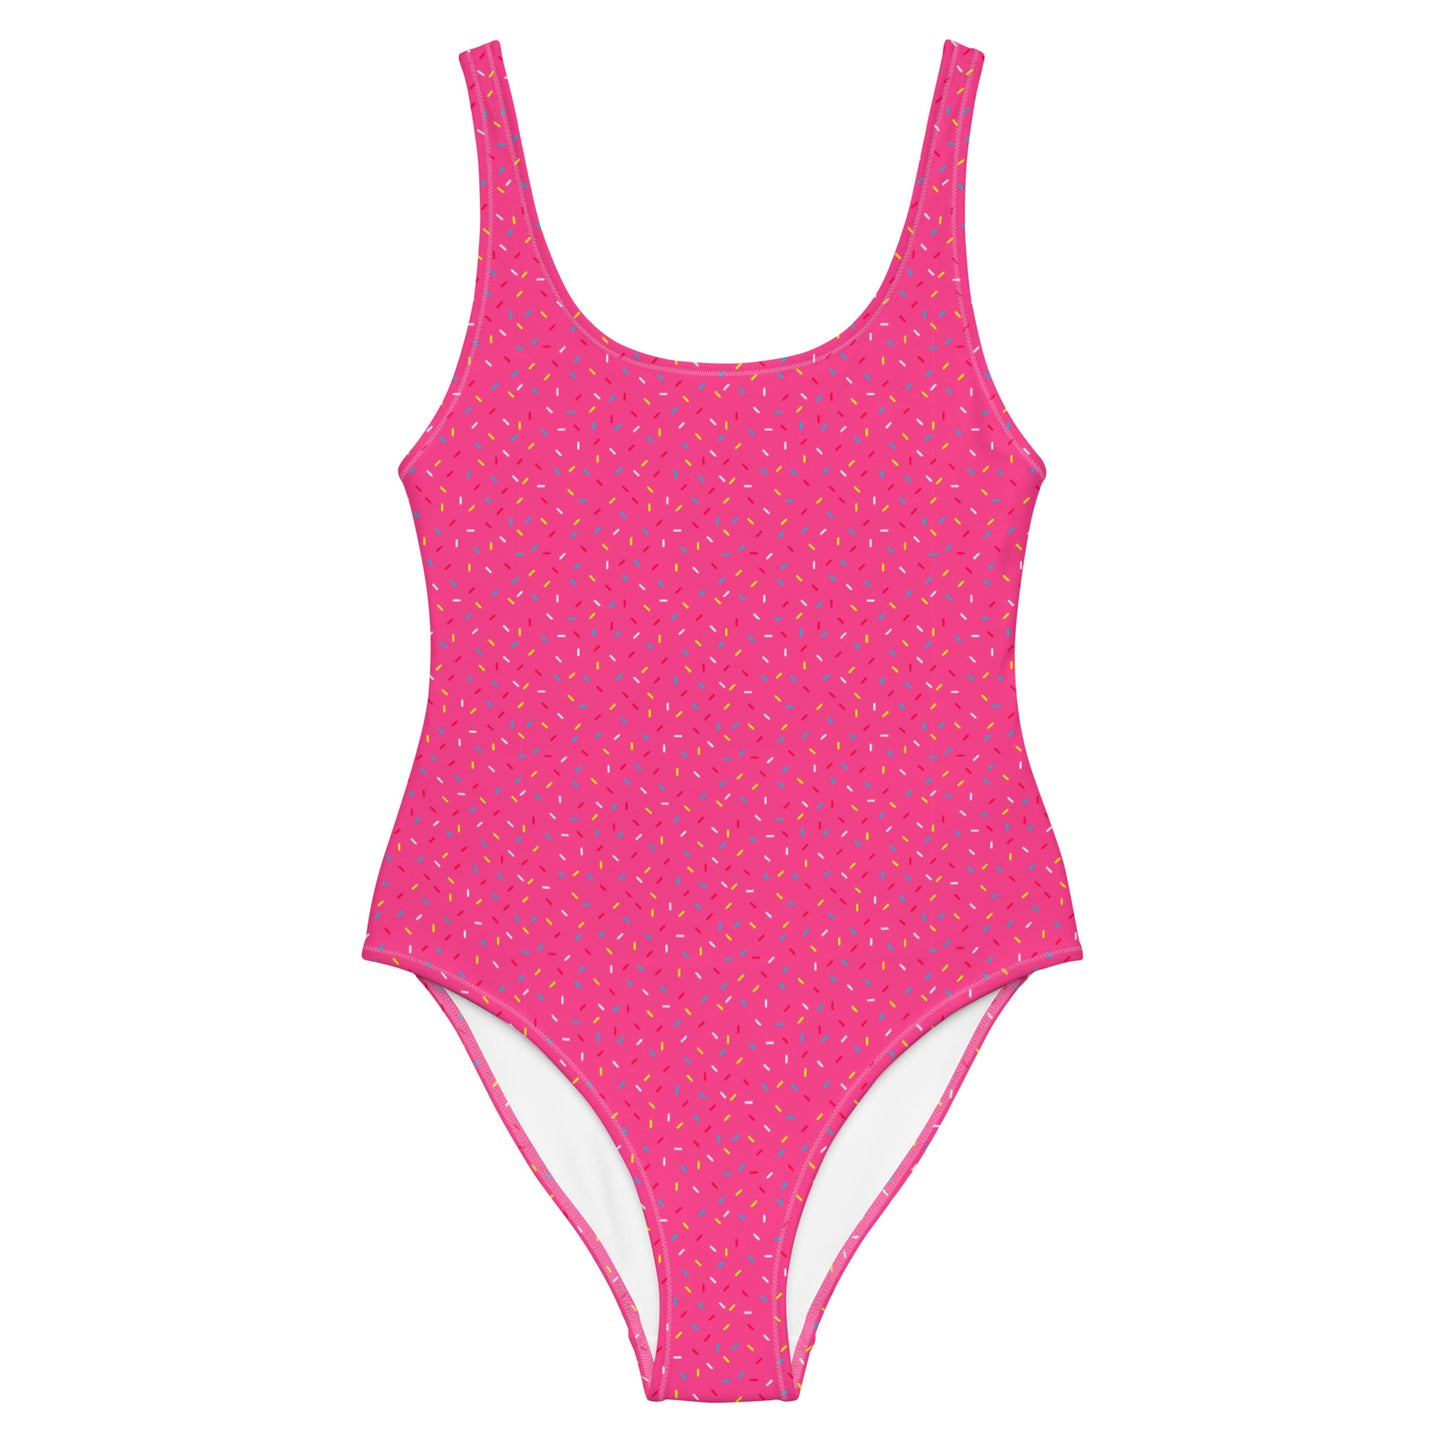 Pink Sprinkles One-Piece Swimsuit